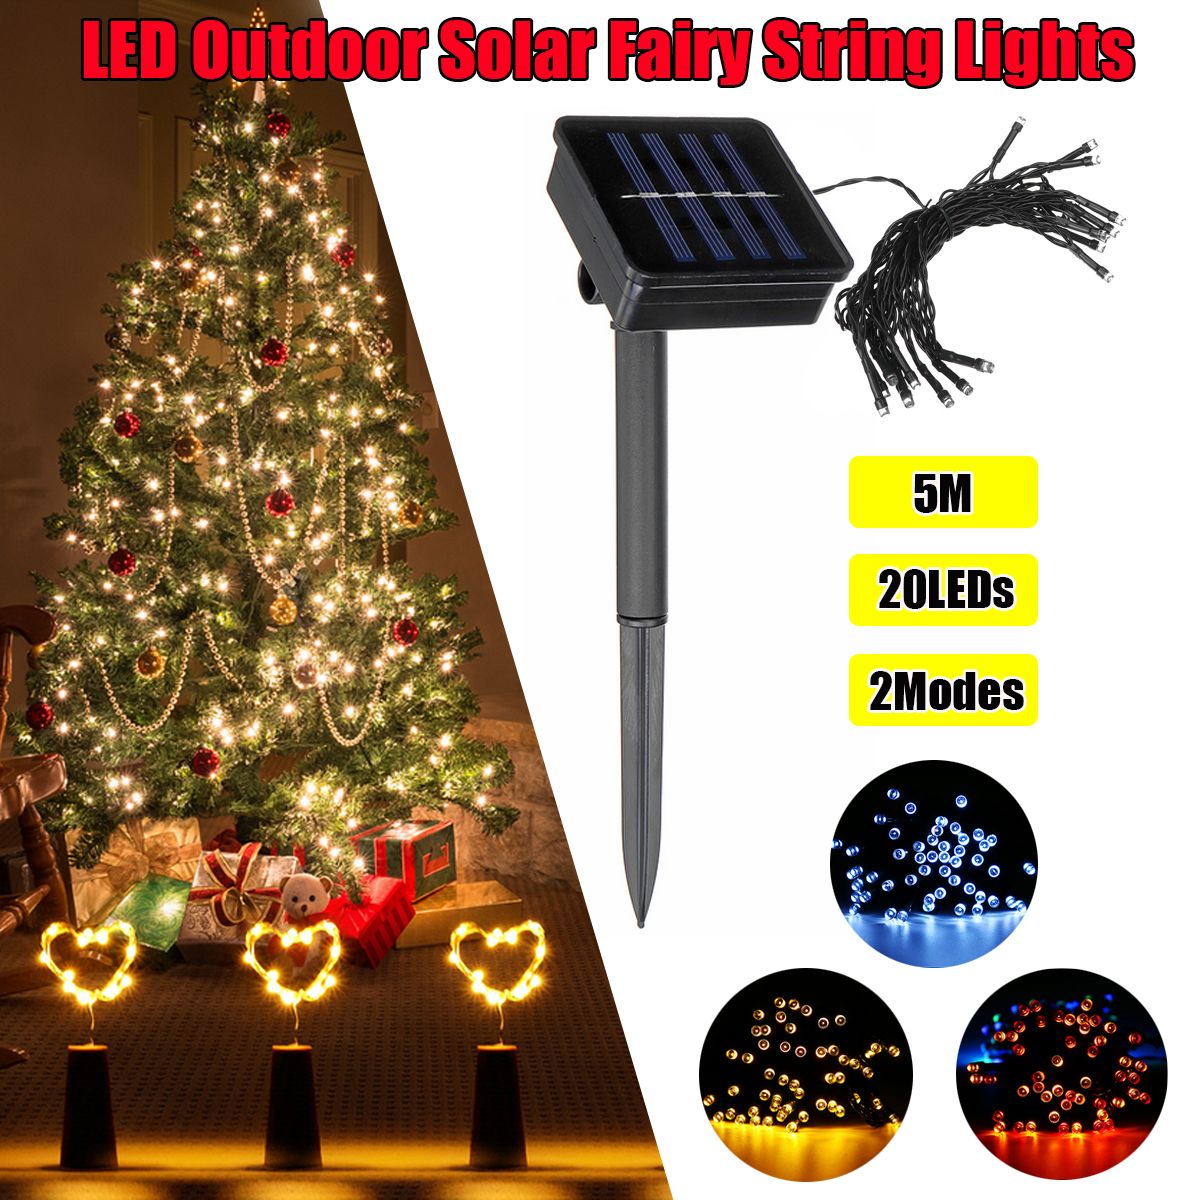 5M-20LED-Solar-Fairy-String-Light-2-Modes-Outdoor-Waterproof-Garden-Home-Decorative-Lamp-1723795